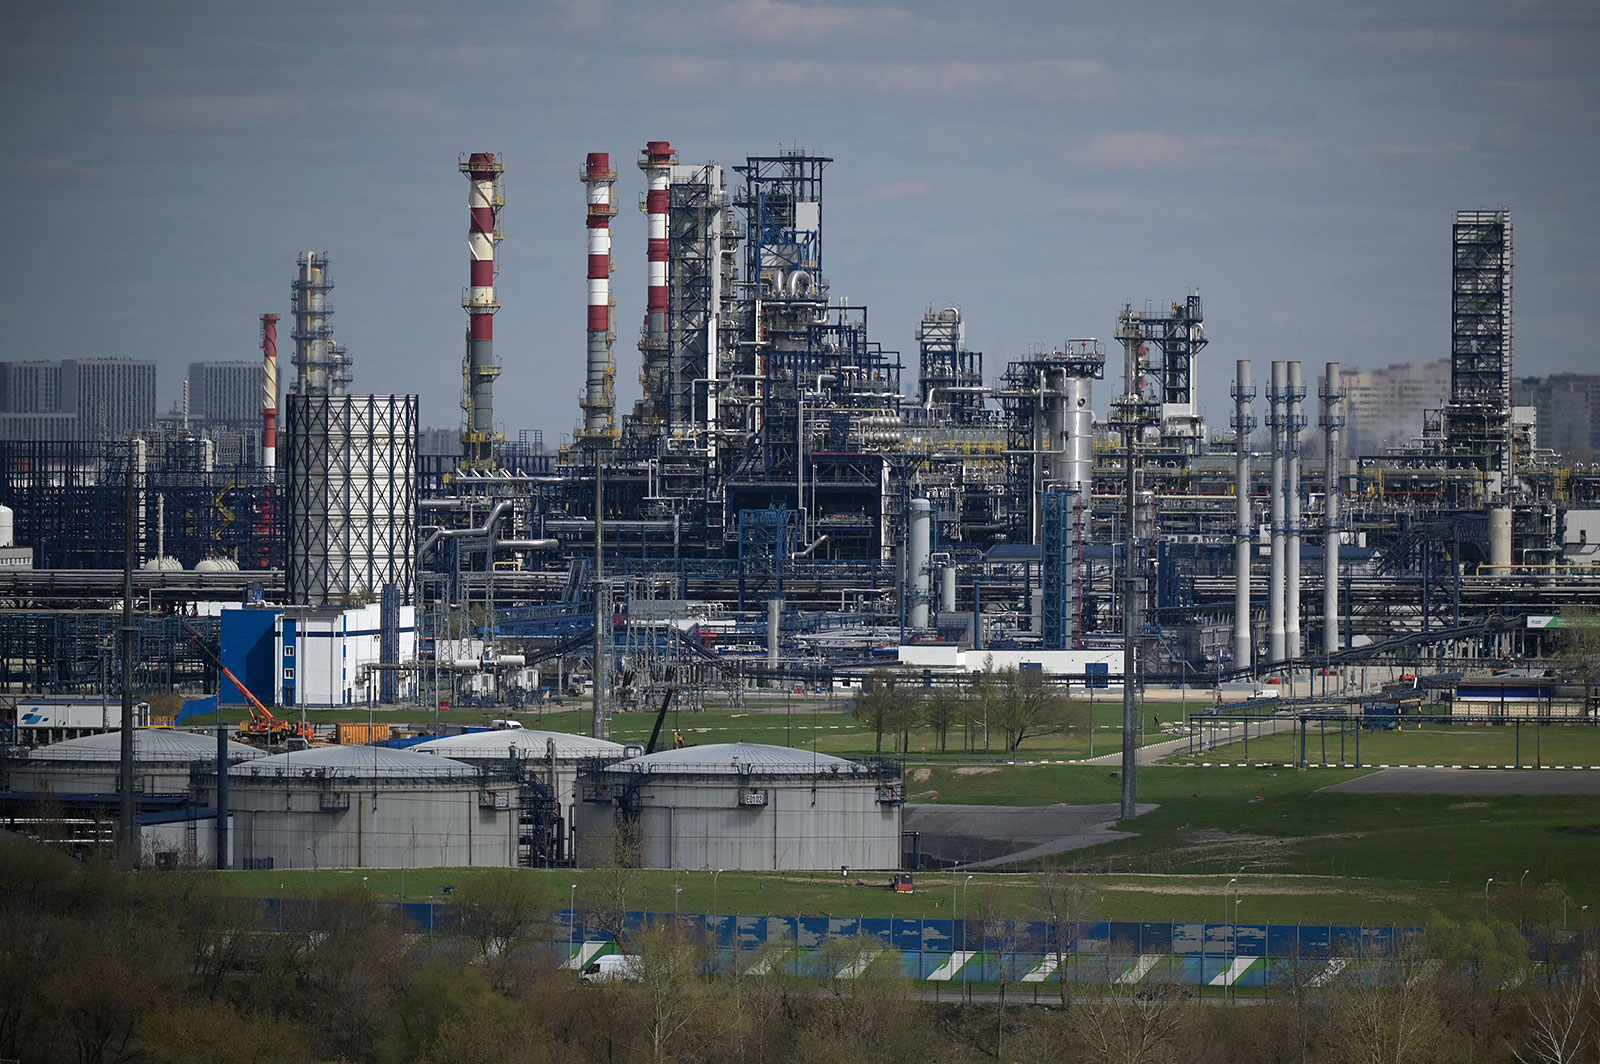 The Gazprom Neft's Moscow oil refinery is seen on the southeastern outskirts of Moscow on April 28.